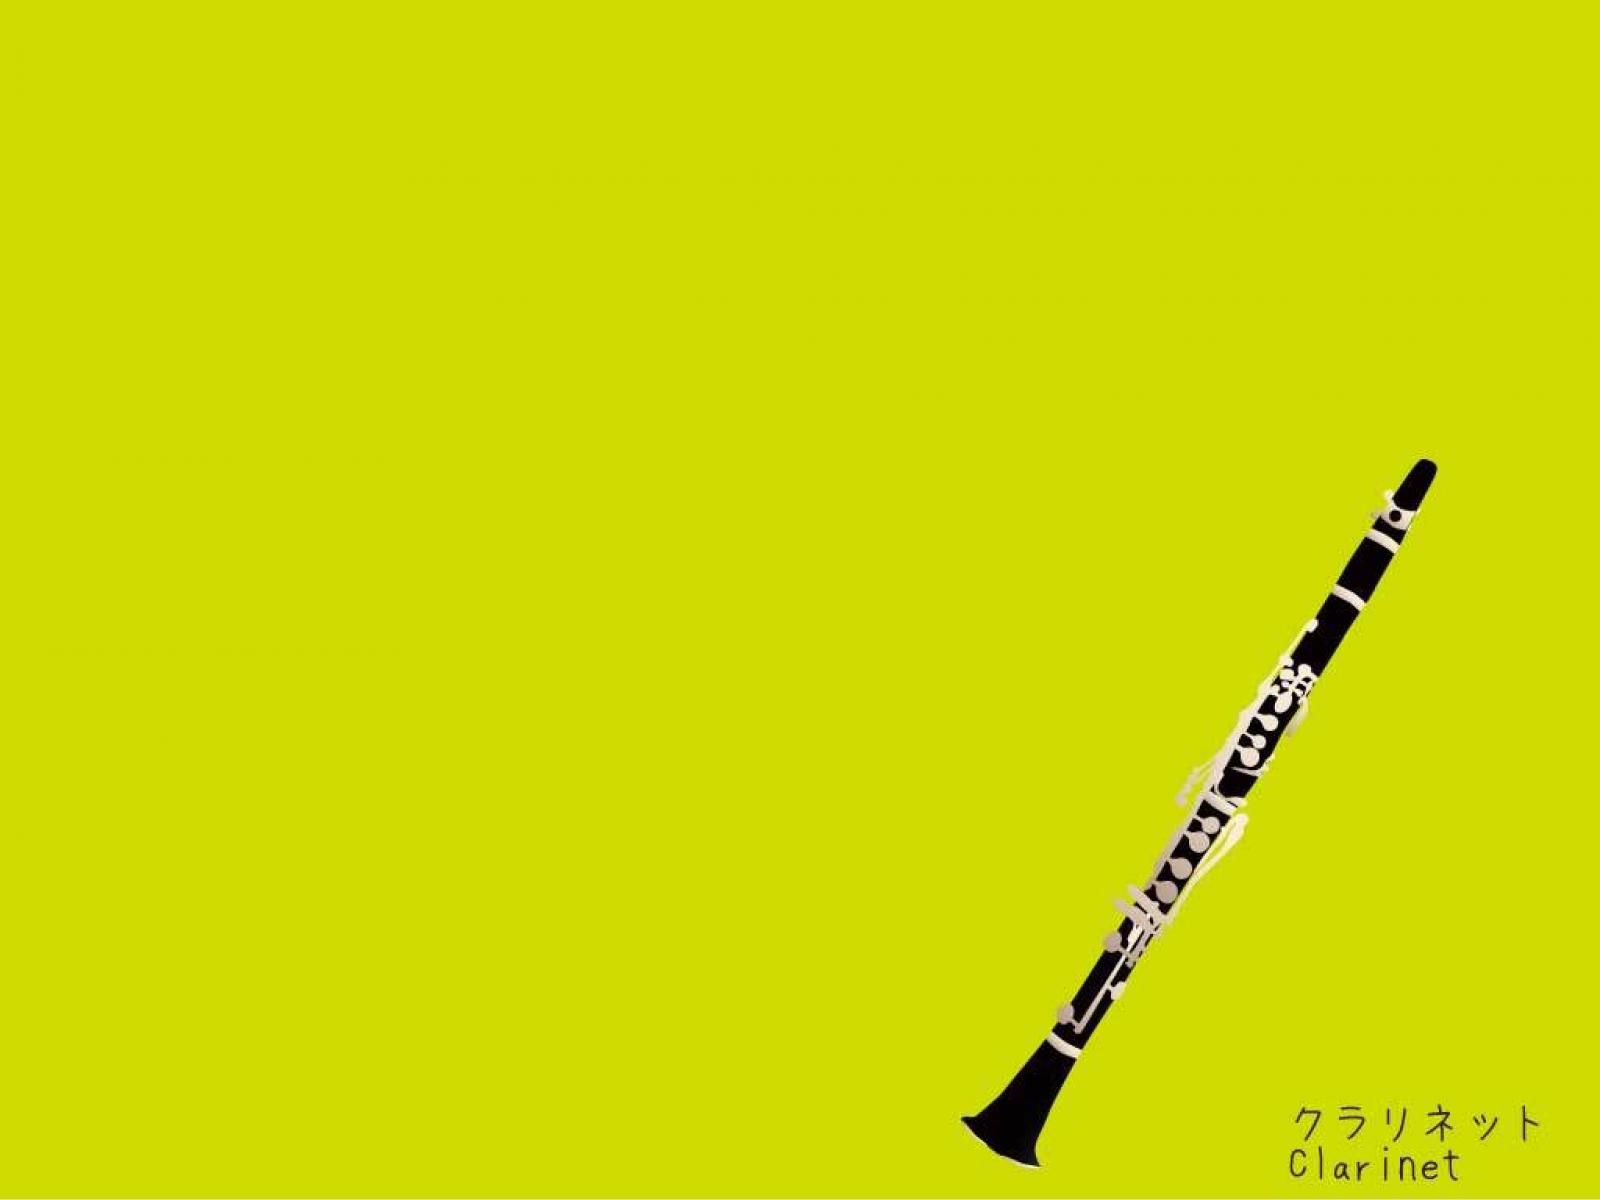 Clarinet Wallpapers 4k Hd Clarinet Backgrounds On Wallpaperbat